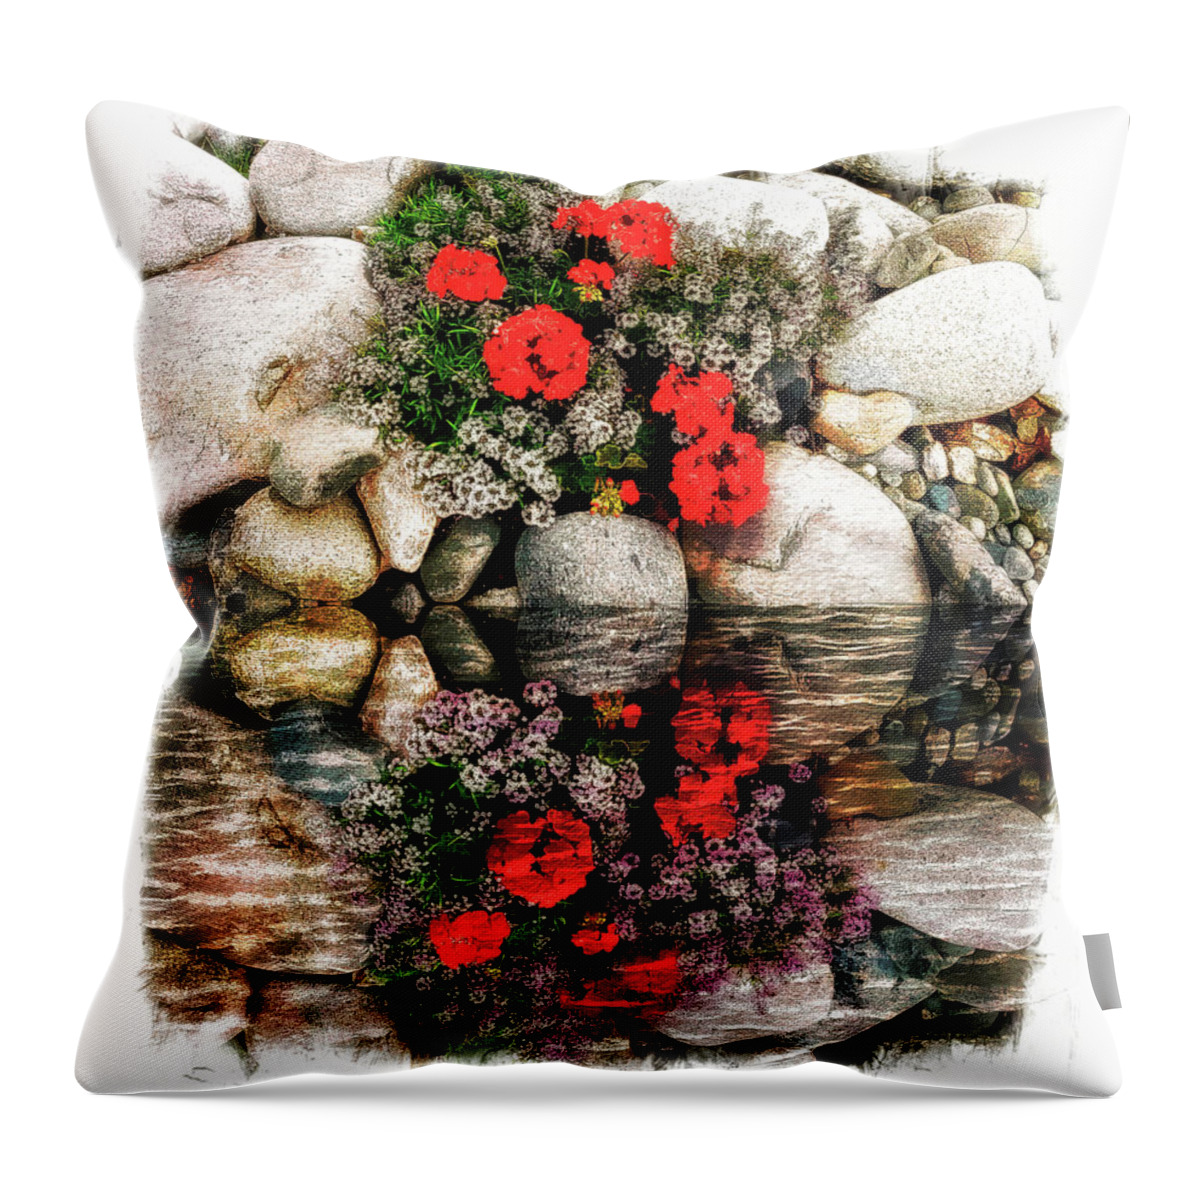 United States Throw Pillow featuring the photograph Denali National Park Flowers by Joseph Hendrix